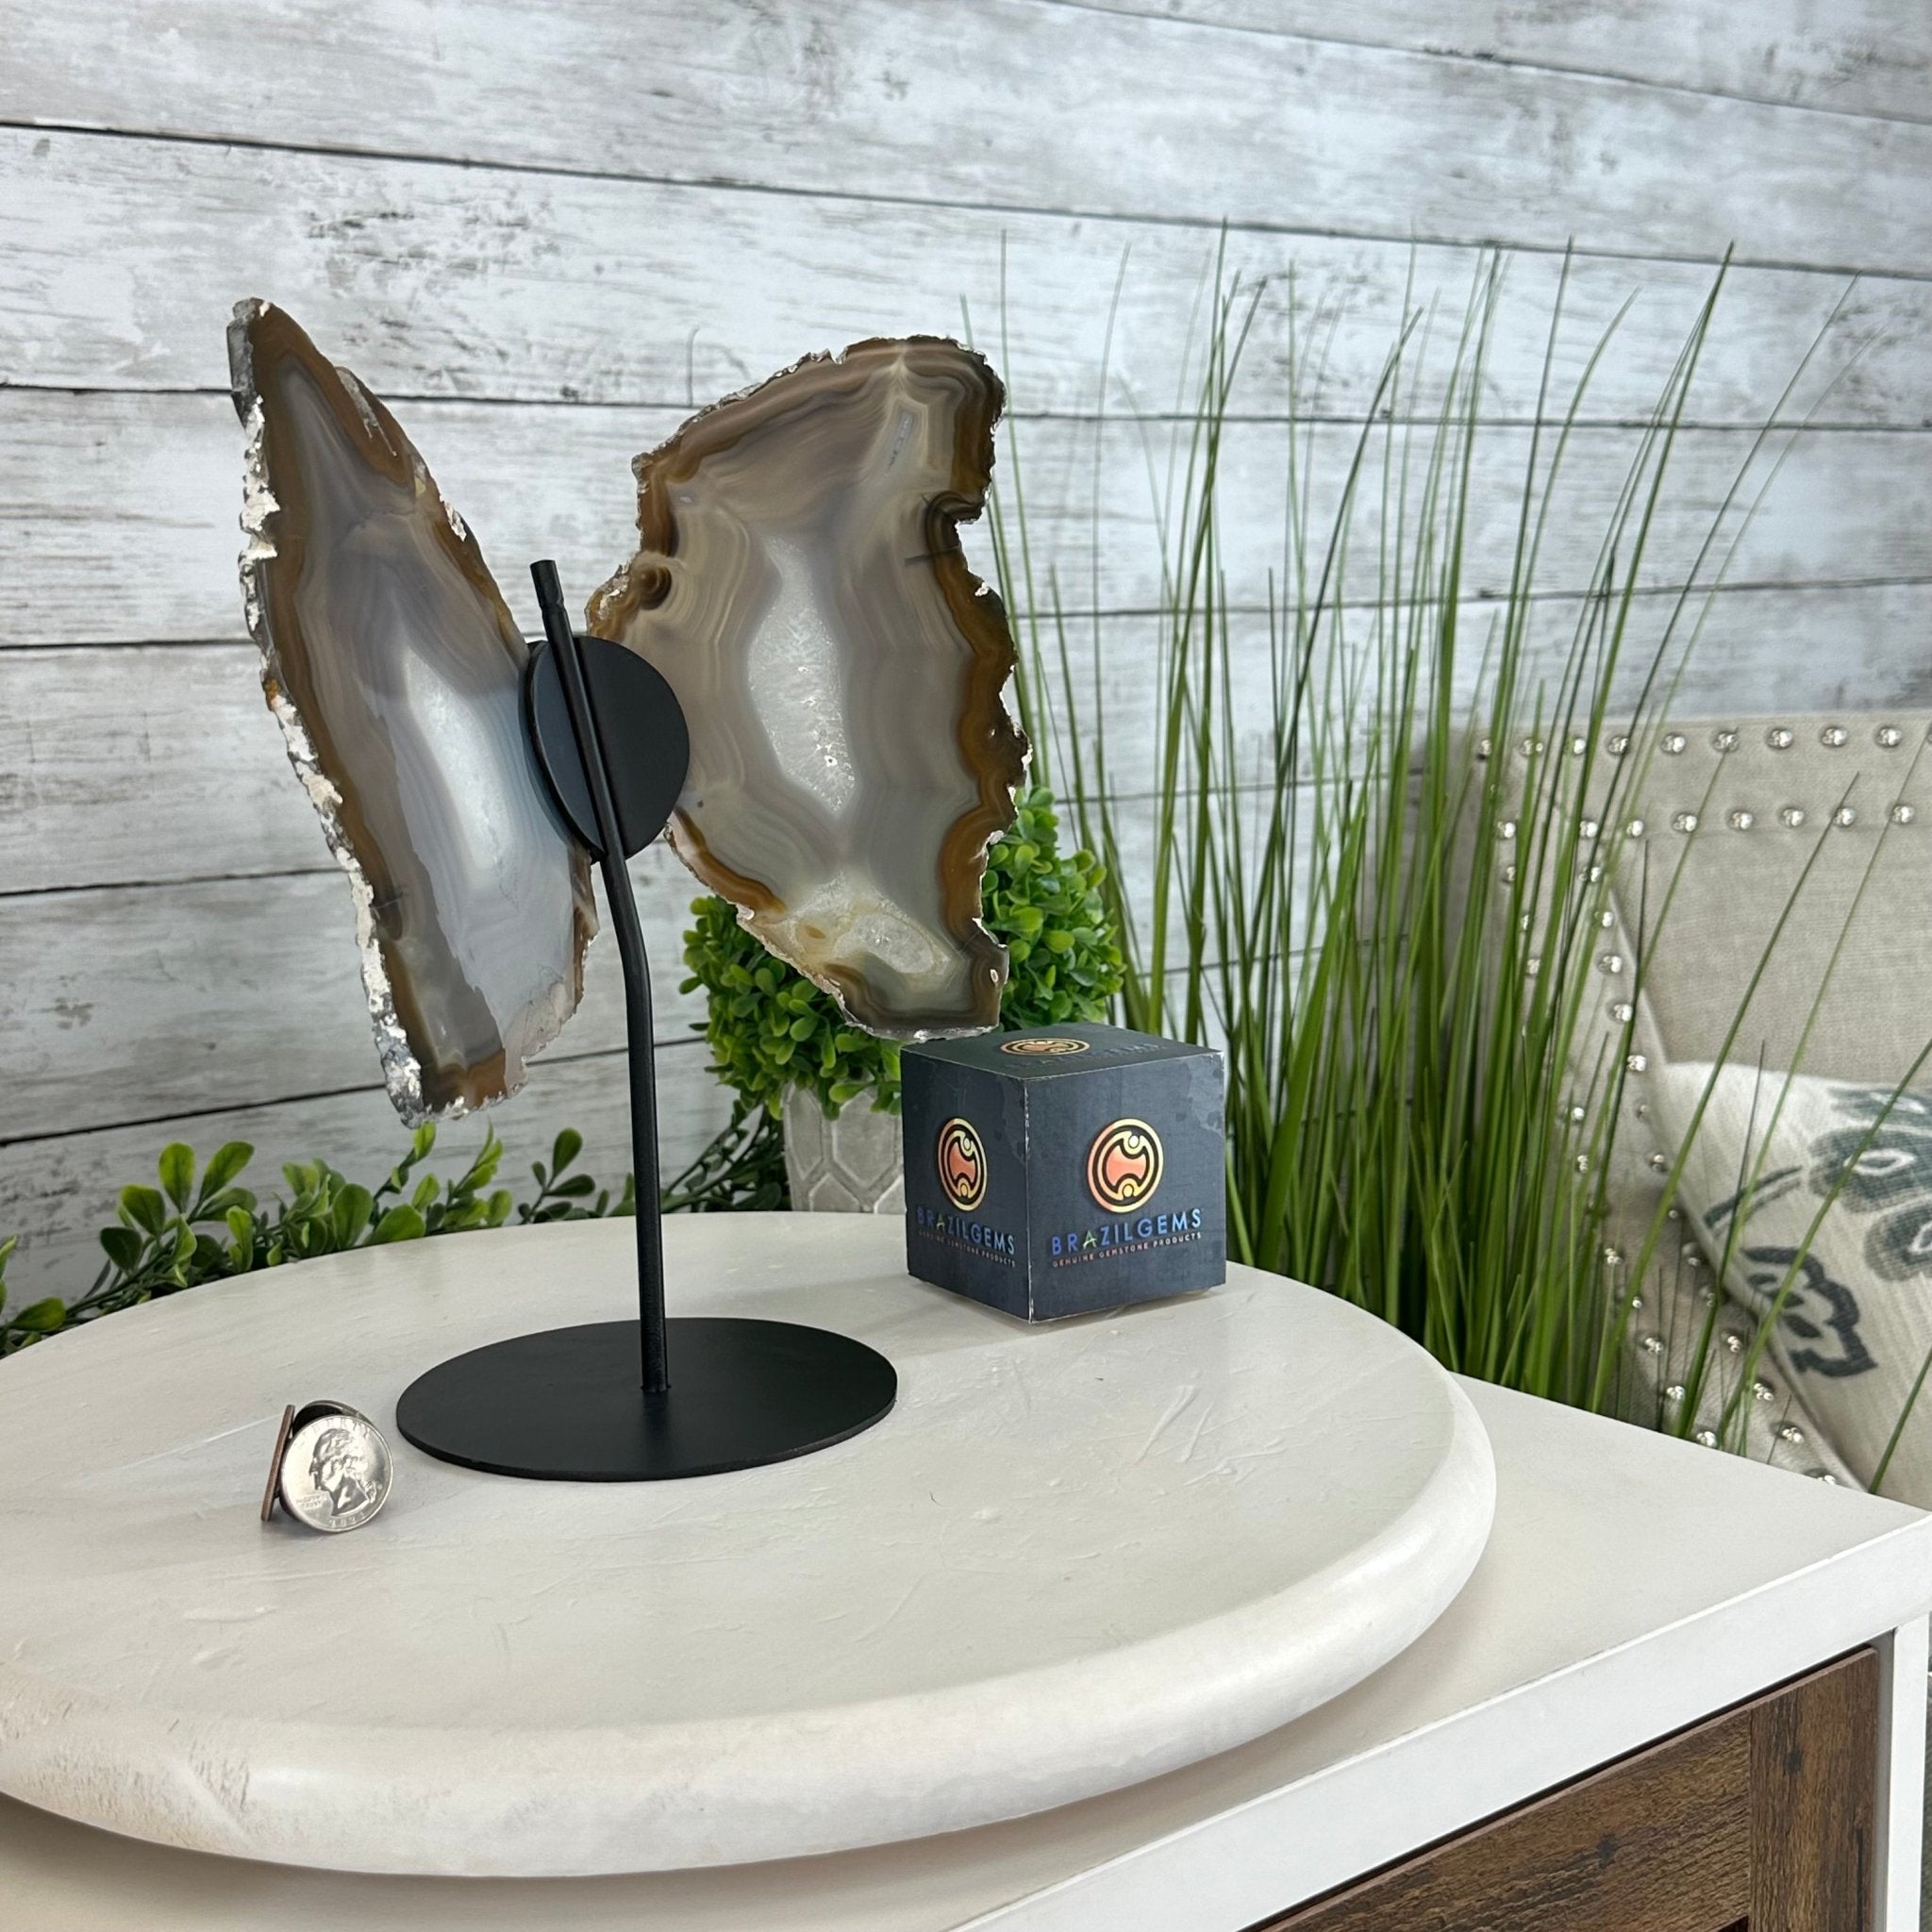 Natural Brazilian Agate "Butterfly Wings", Metal Stand, 10.1" Tall #5050NA-111 - Brazil GemsBrazil GemsNatural Brazilian Agate "Butterfly Wings", Metal Stand, 10.1" Tall #5050NA-111Agate Butterfly Wings5050NA-111